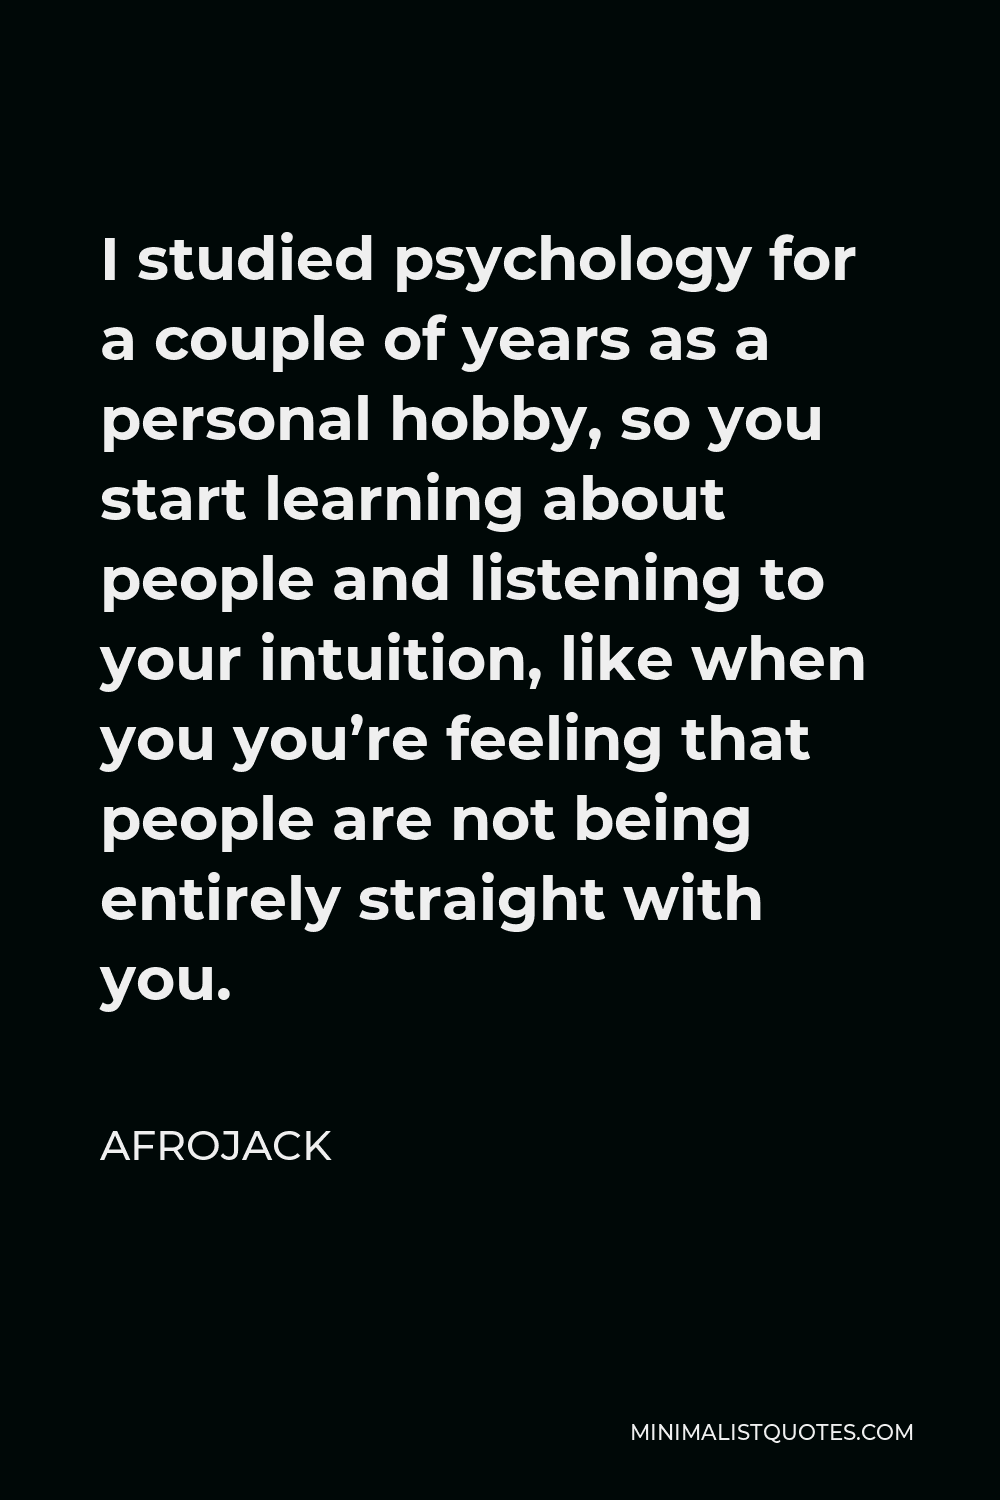 Afrojack Quote - I studied psychology for a couple of years as a personal hobby, so you start learning about people and listening to your intuition, like when you you’re feeling that people are not being entirely straight with you.